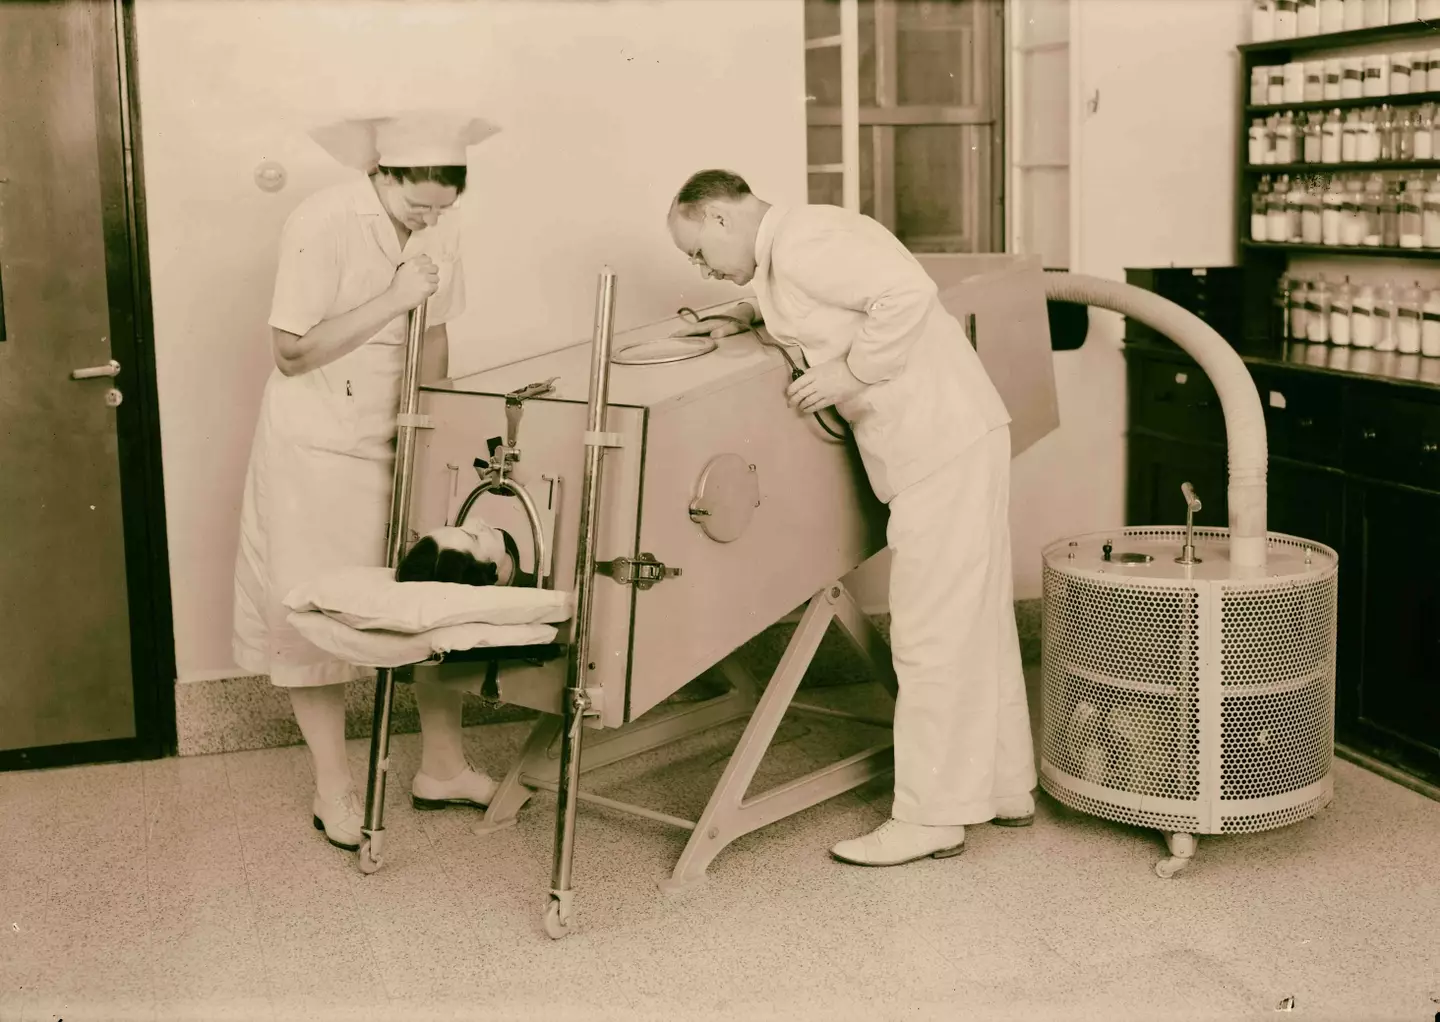 The iron lung helps patients breathe.